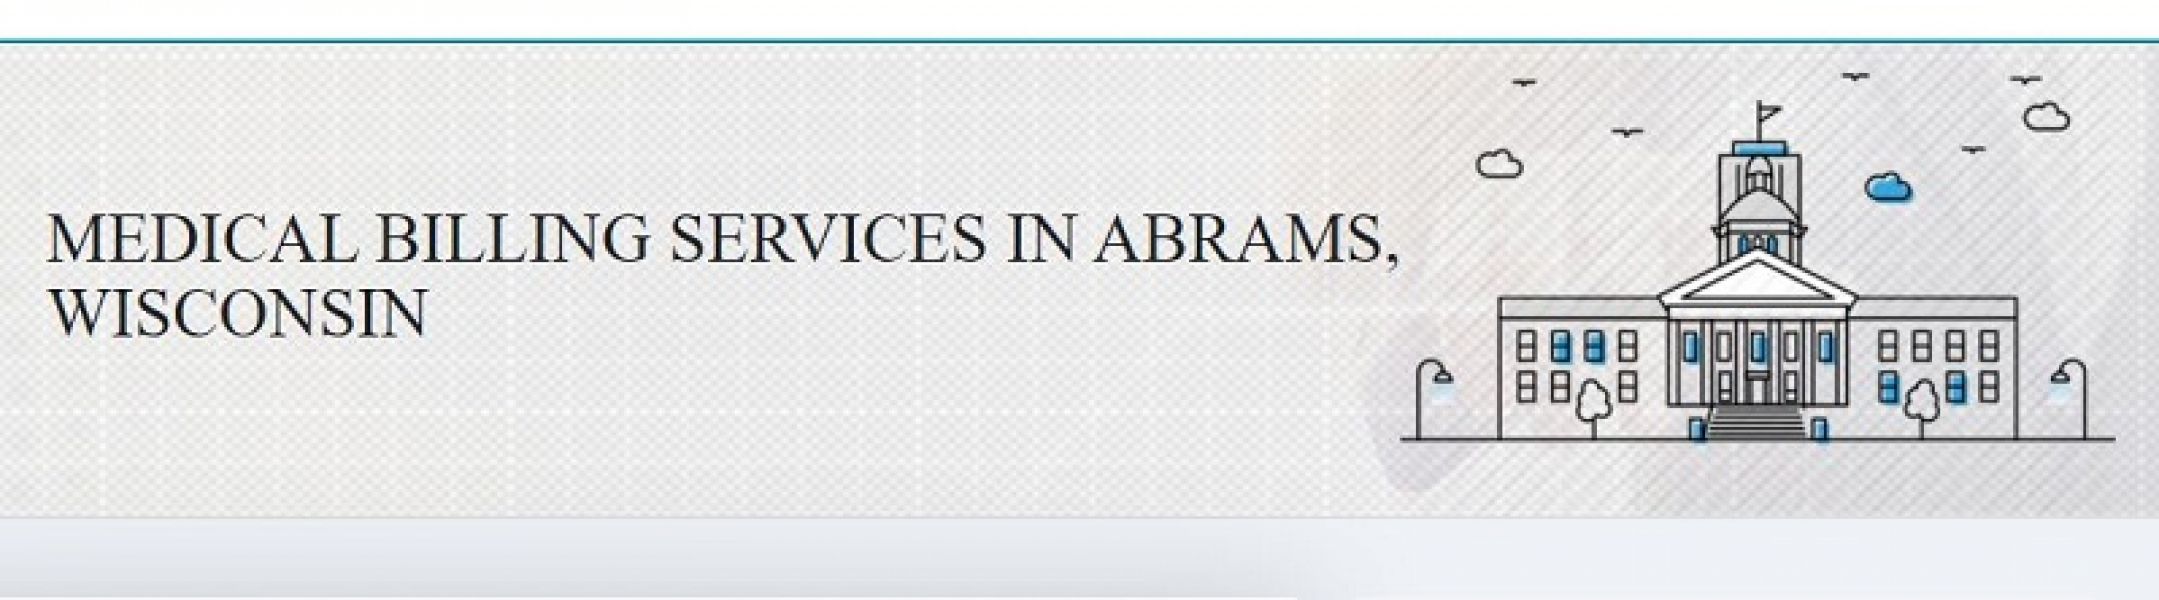 Medical billing services in Abrams, WI